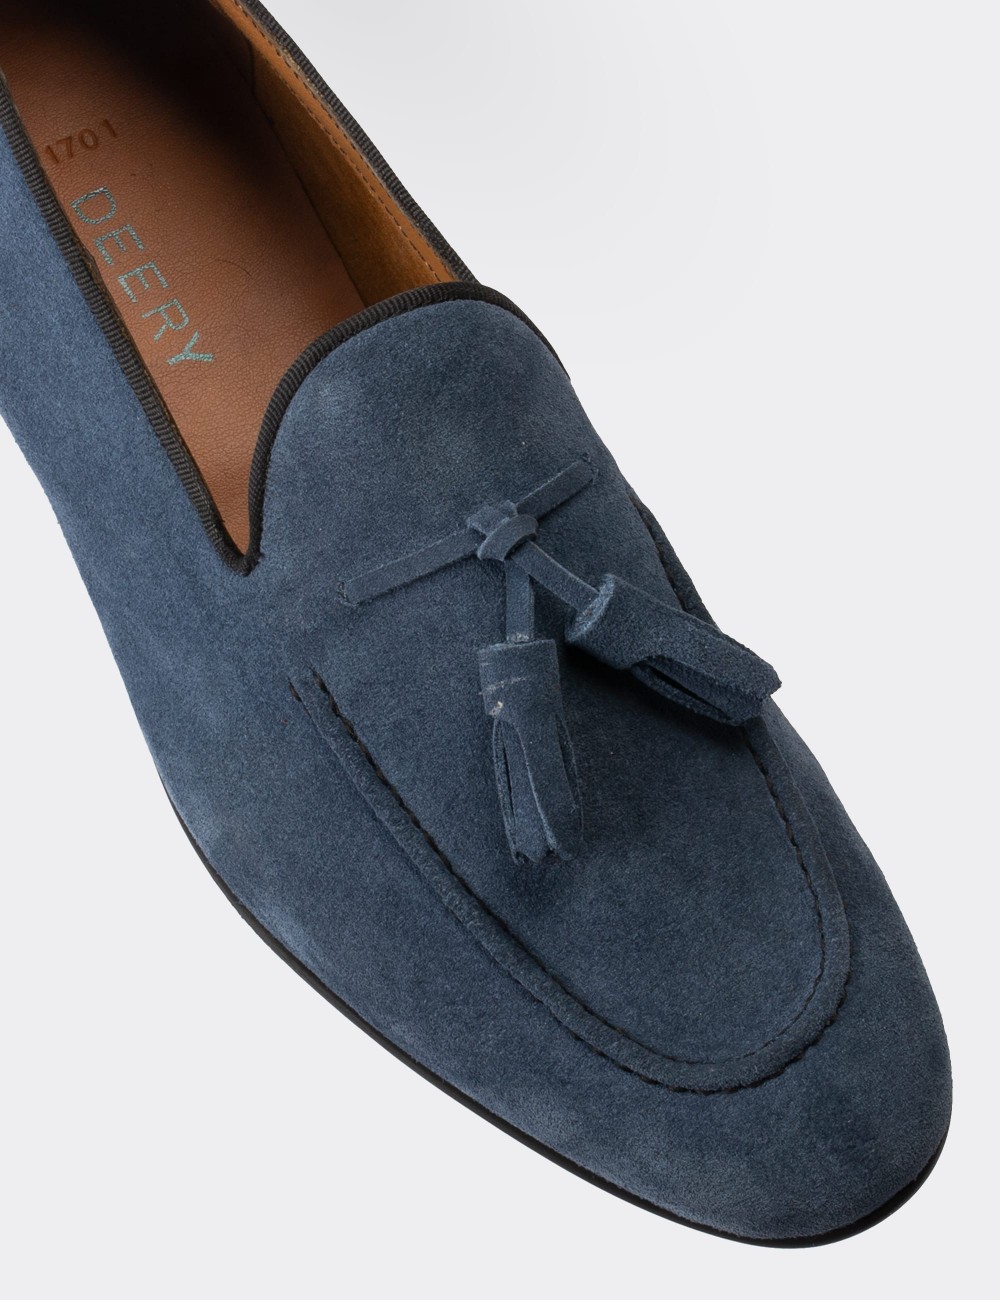 Blue Suede Leather Loafers - 01701MMVIC01